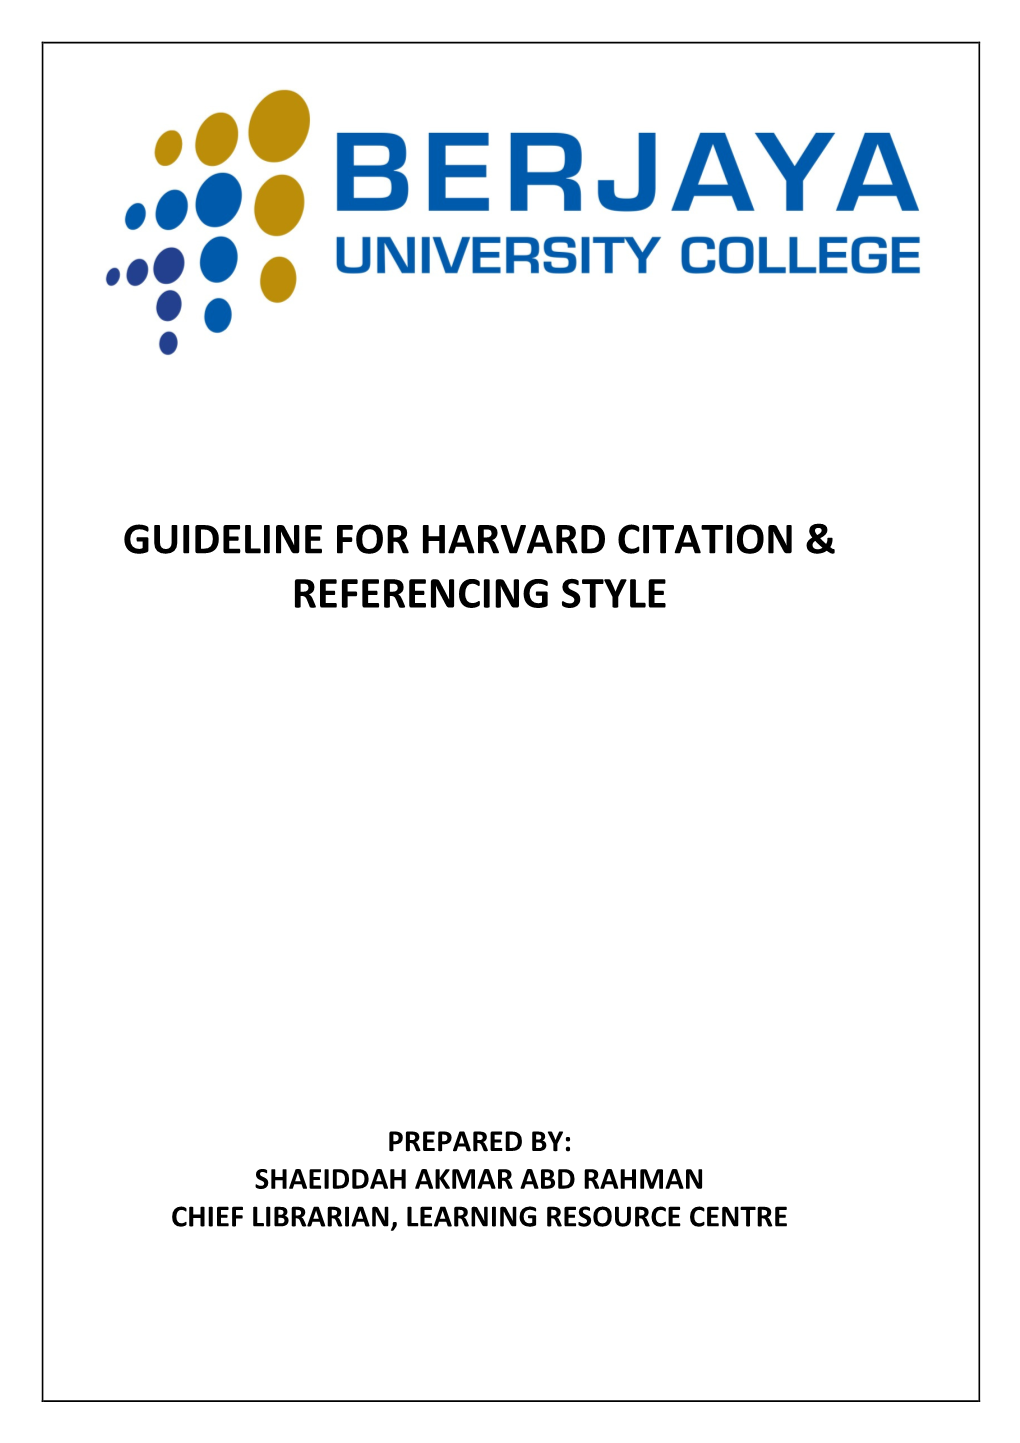 Guideline for Harvard Citation & Referencing Style